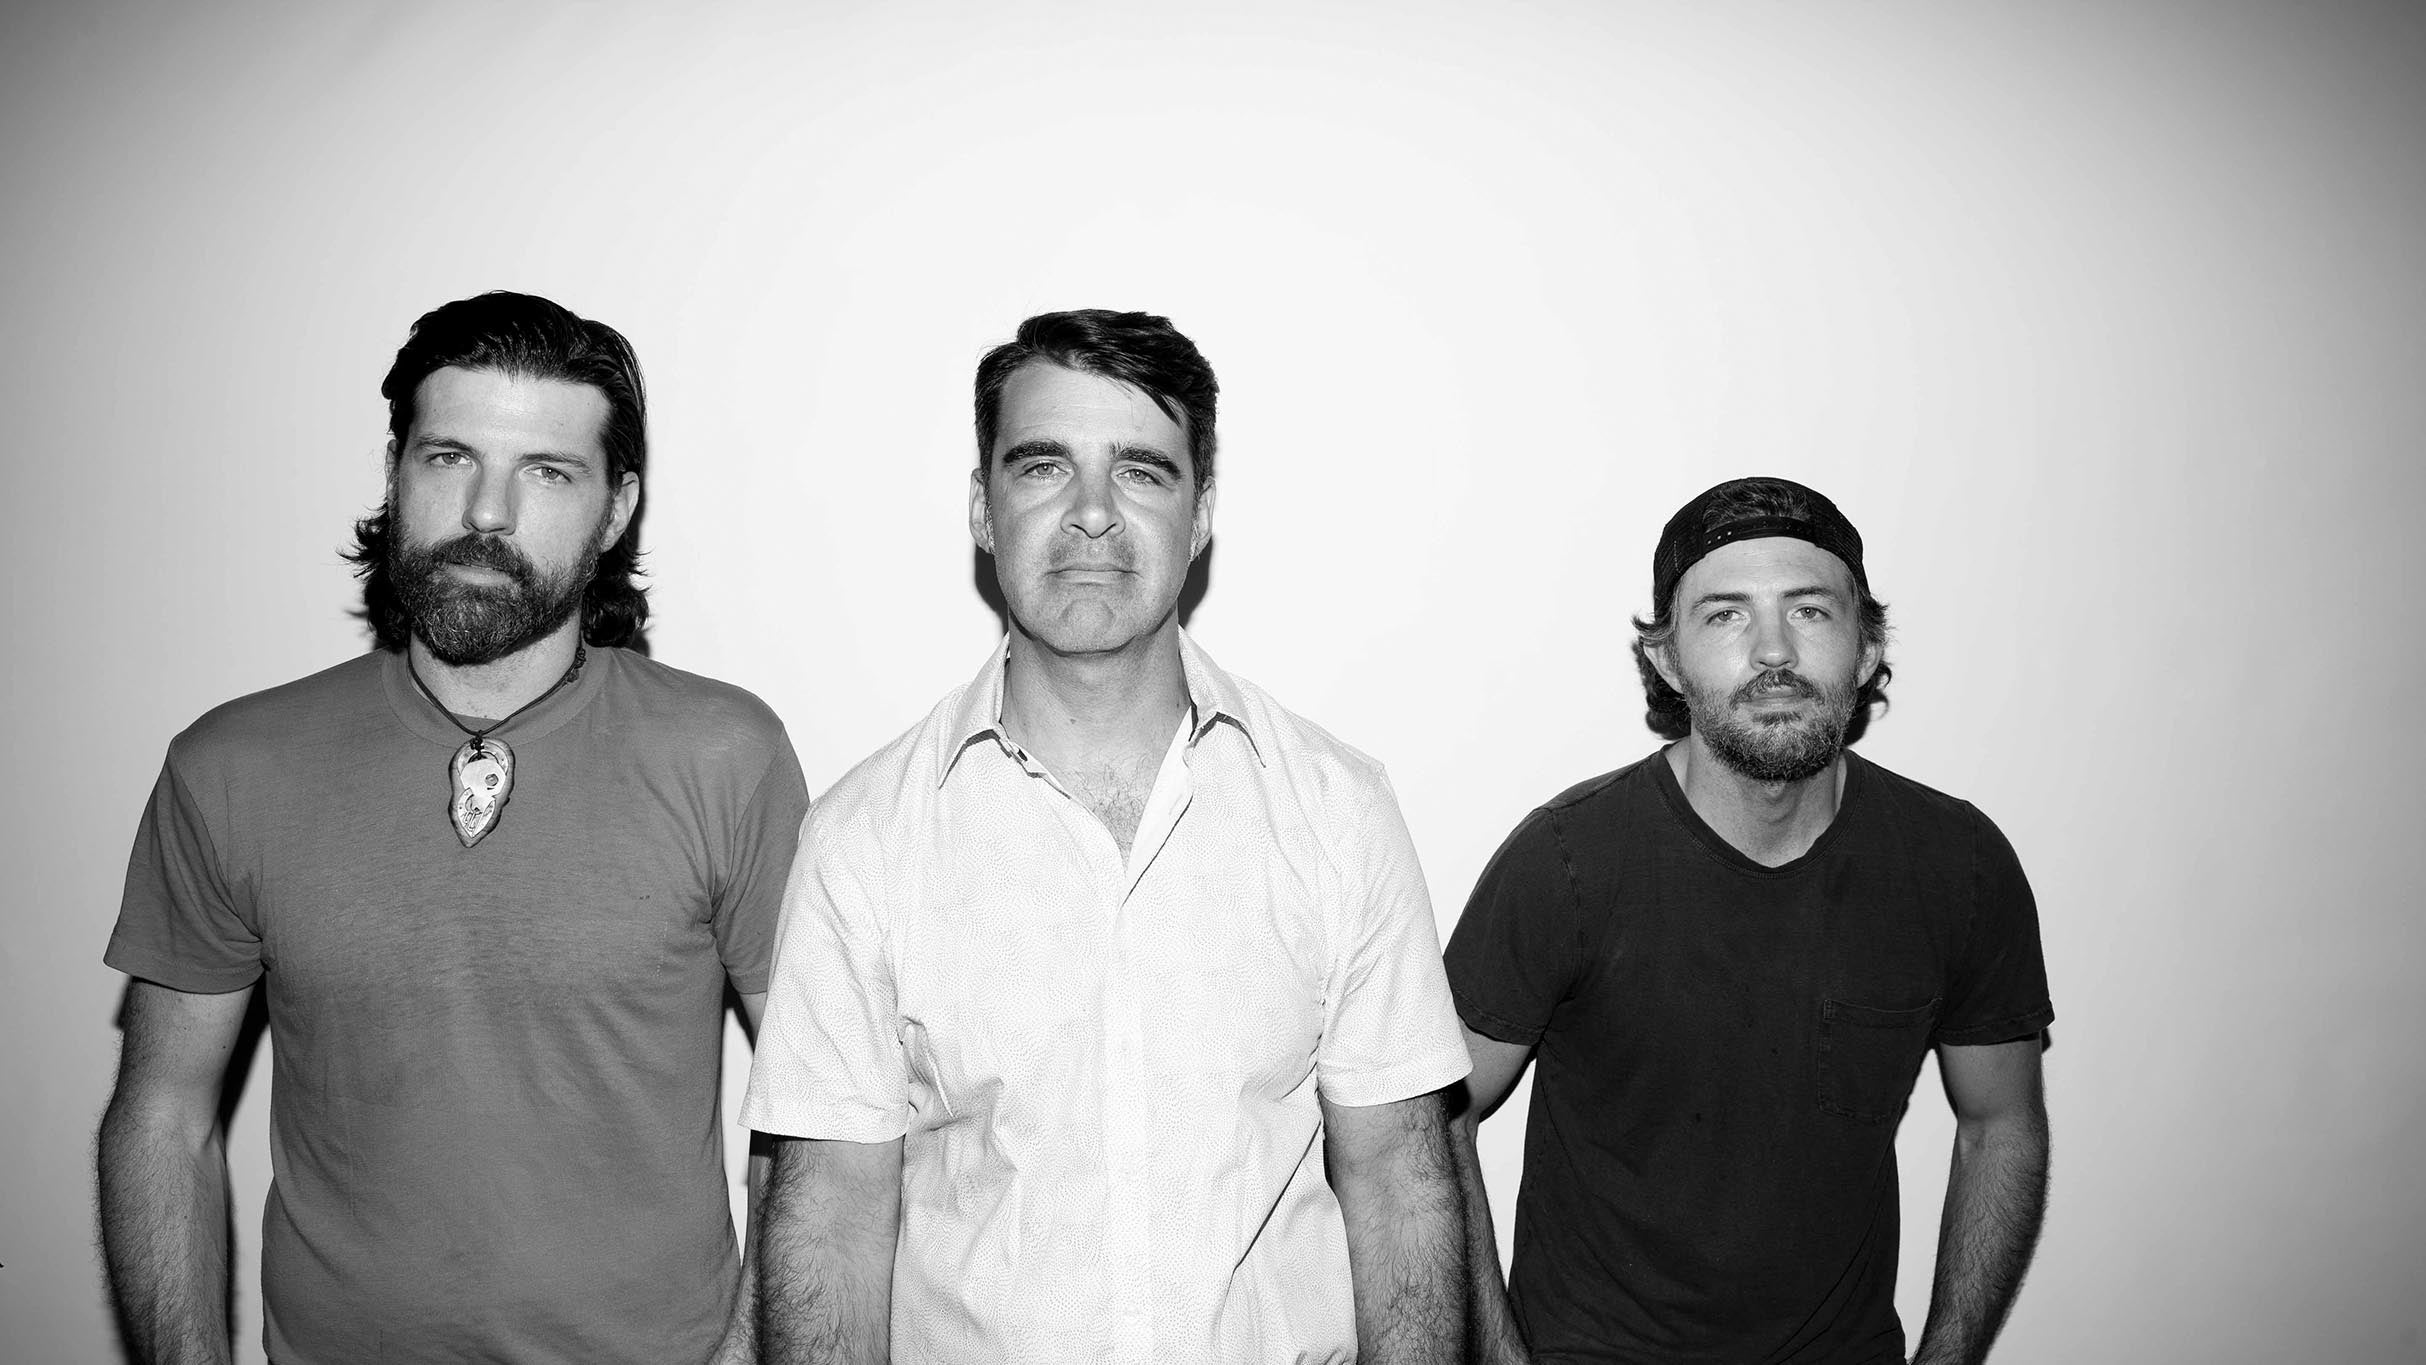 An Evening With The Avett Brothers free pre-sale code for early tickets in Redmond